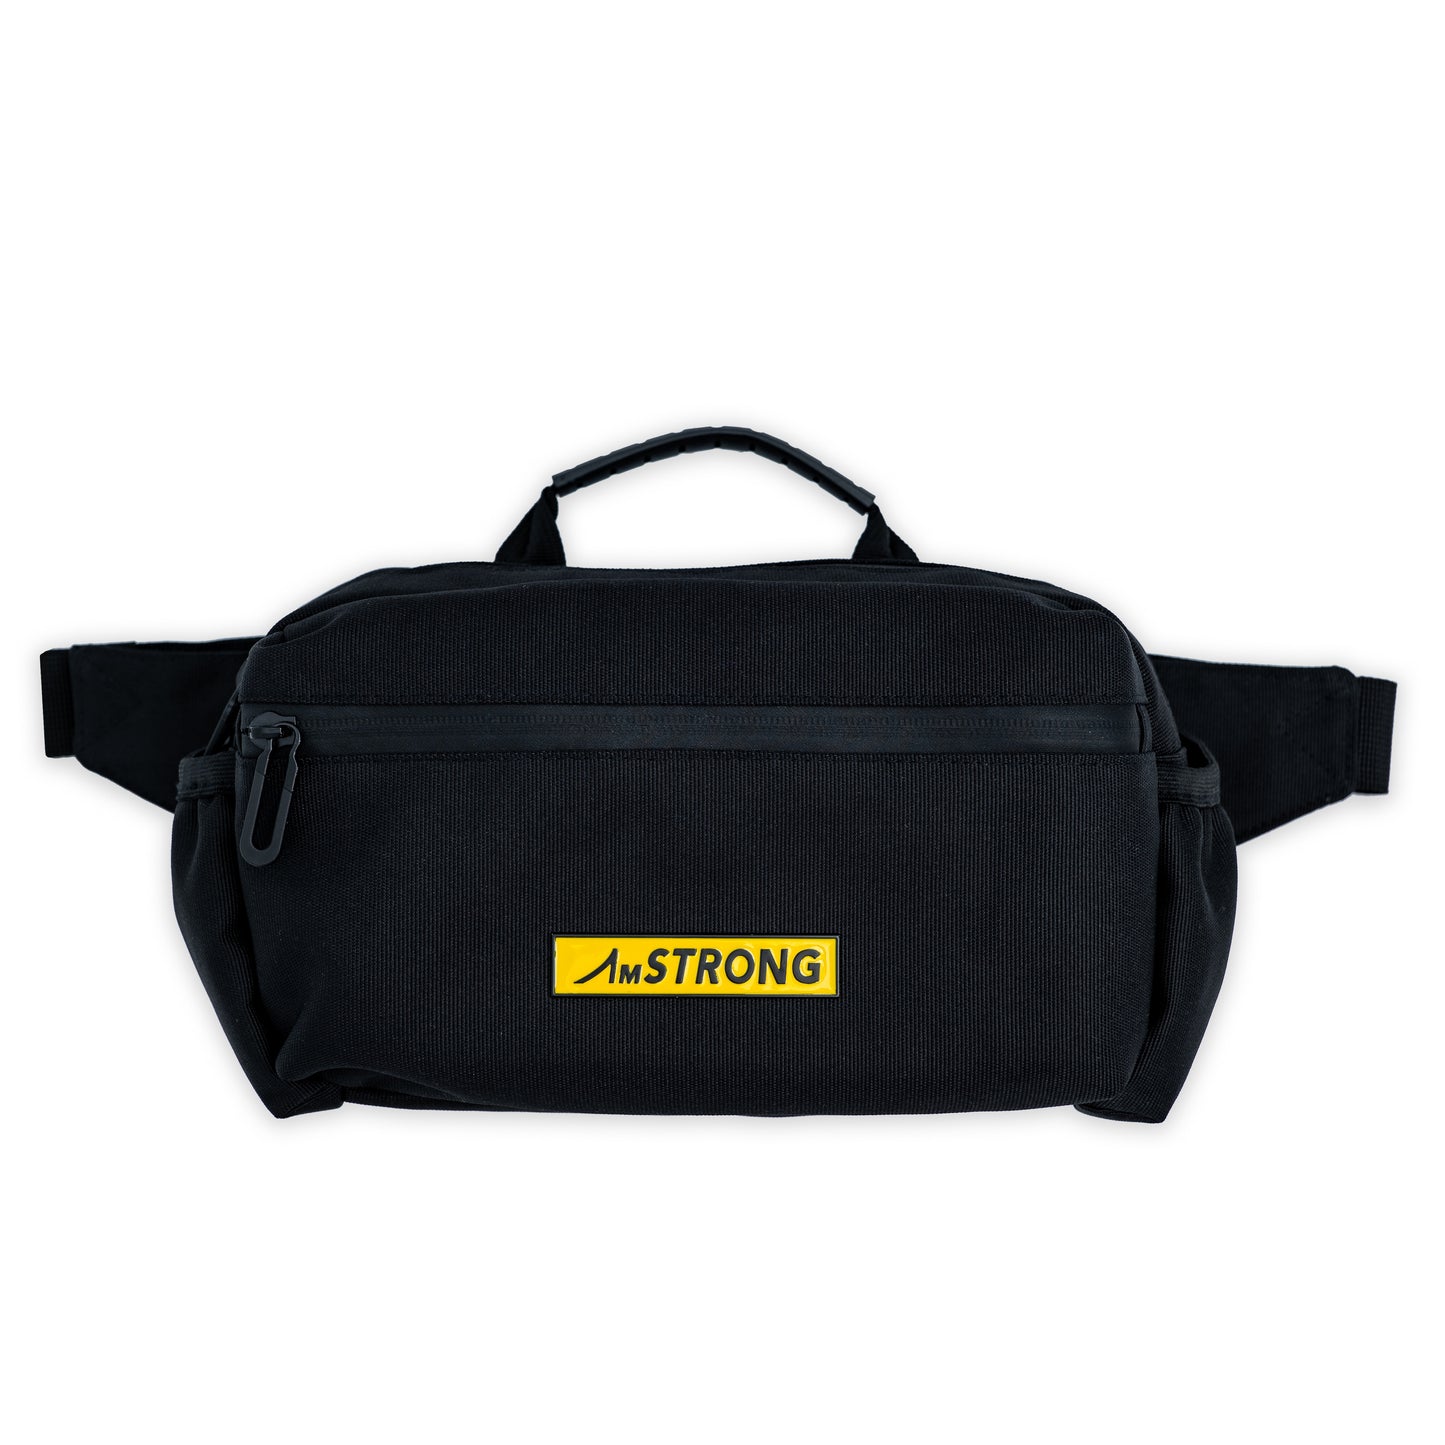 AmSTRONG black belt bag with top handle and yellow metallic label